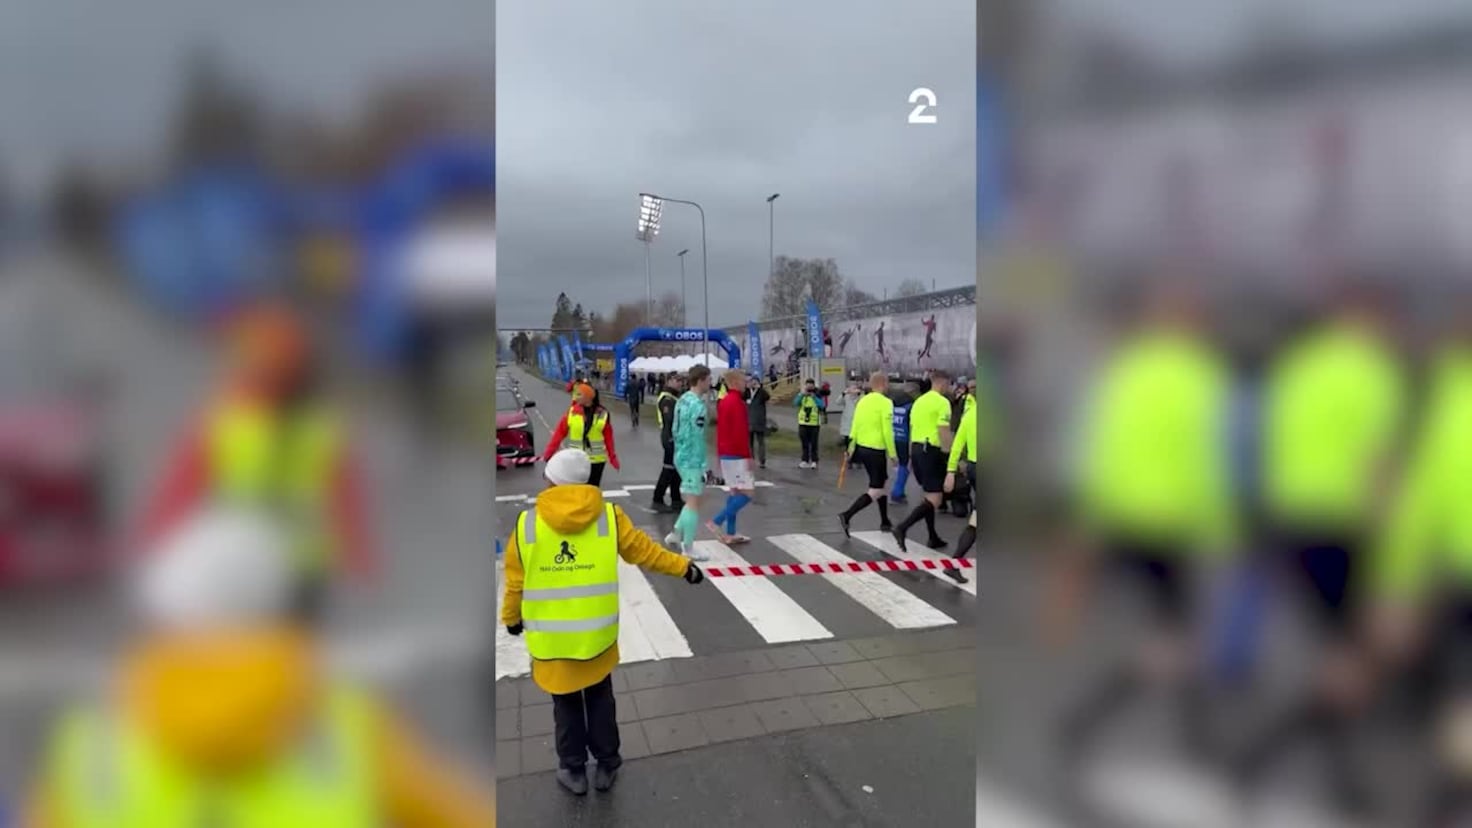 Norwegian Stadium Spectacle: Road Closure for Unique Player Entry Goes Viral